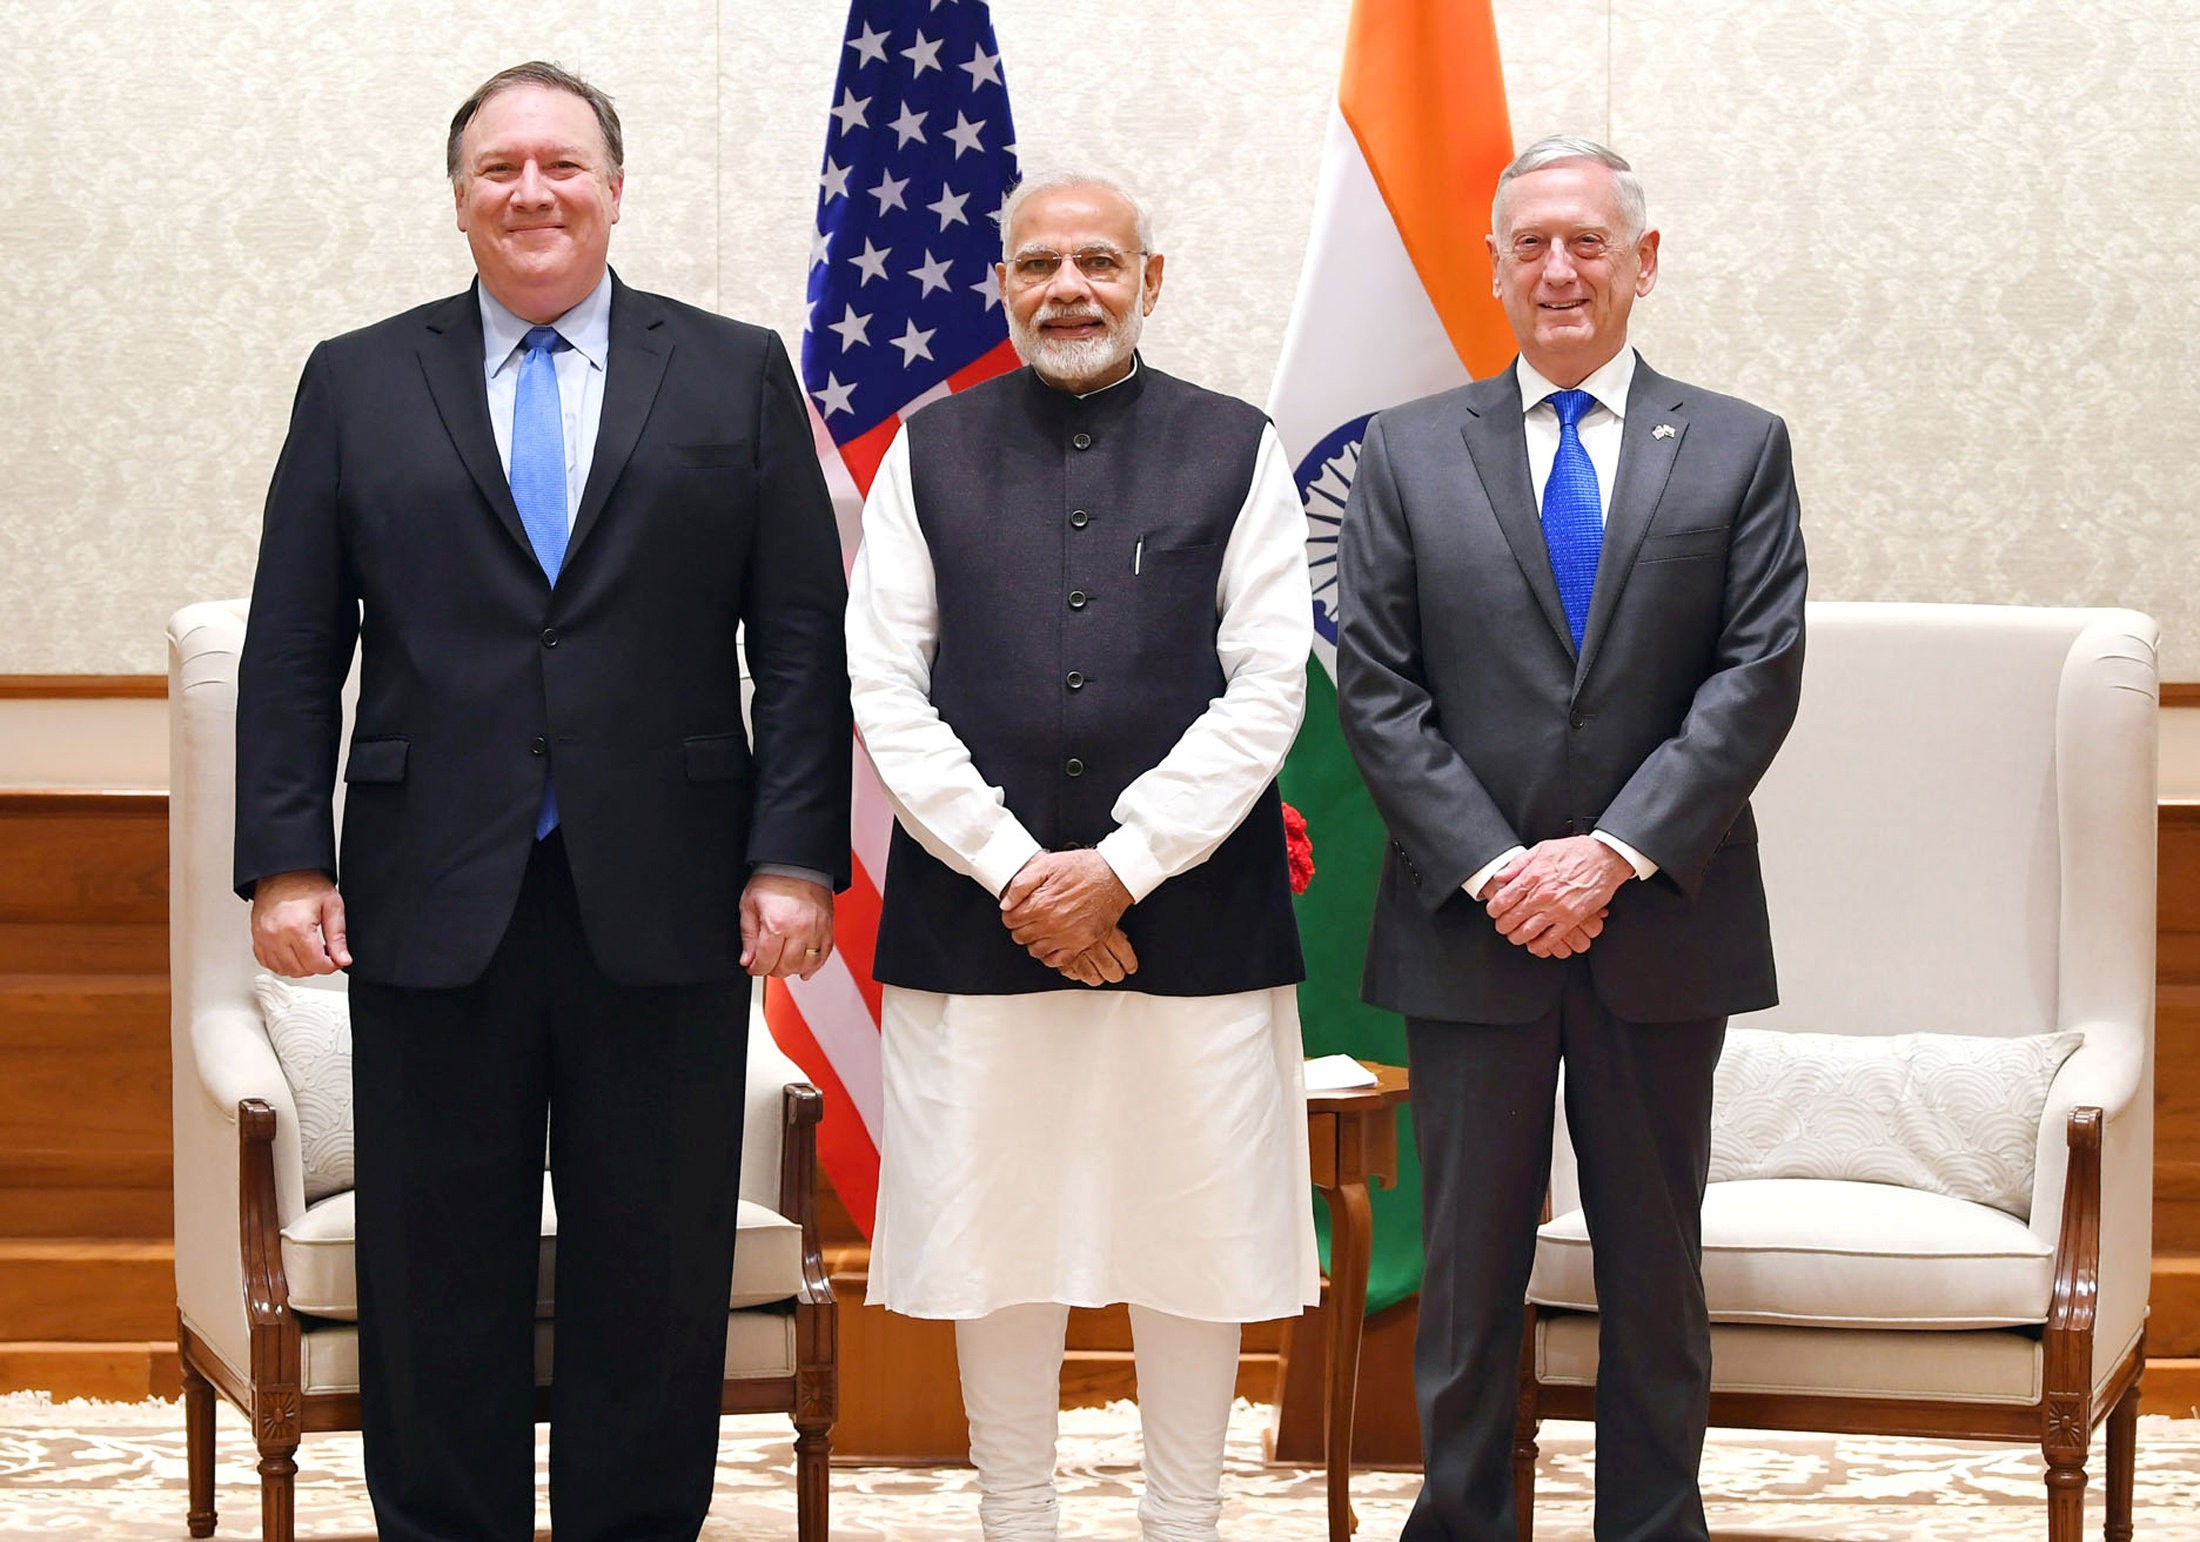 Indian Prime Minister Narendra Modi flanked by US Secretary of State Mike Pompeo and Secretary of Defence James Mattis before a meeting in New Delhi on Thursday. Photo Reuters